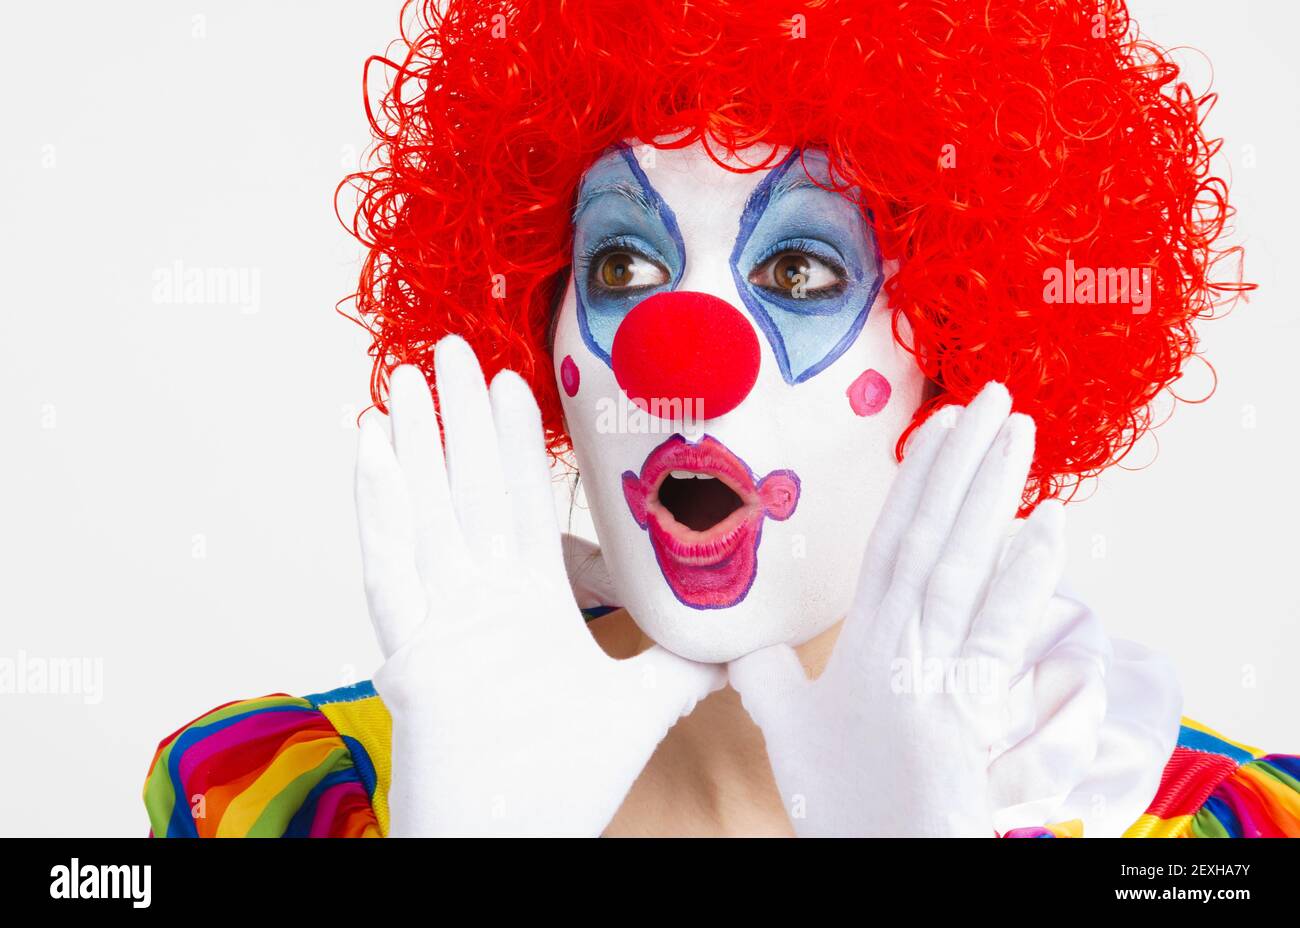 Clown Yelling Extreme Close Up Bright Beautiful Female Performer Stock Photo